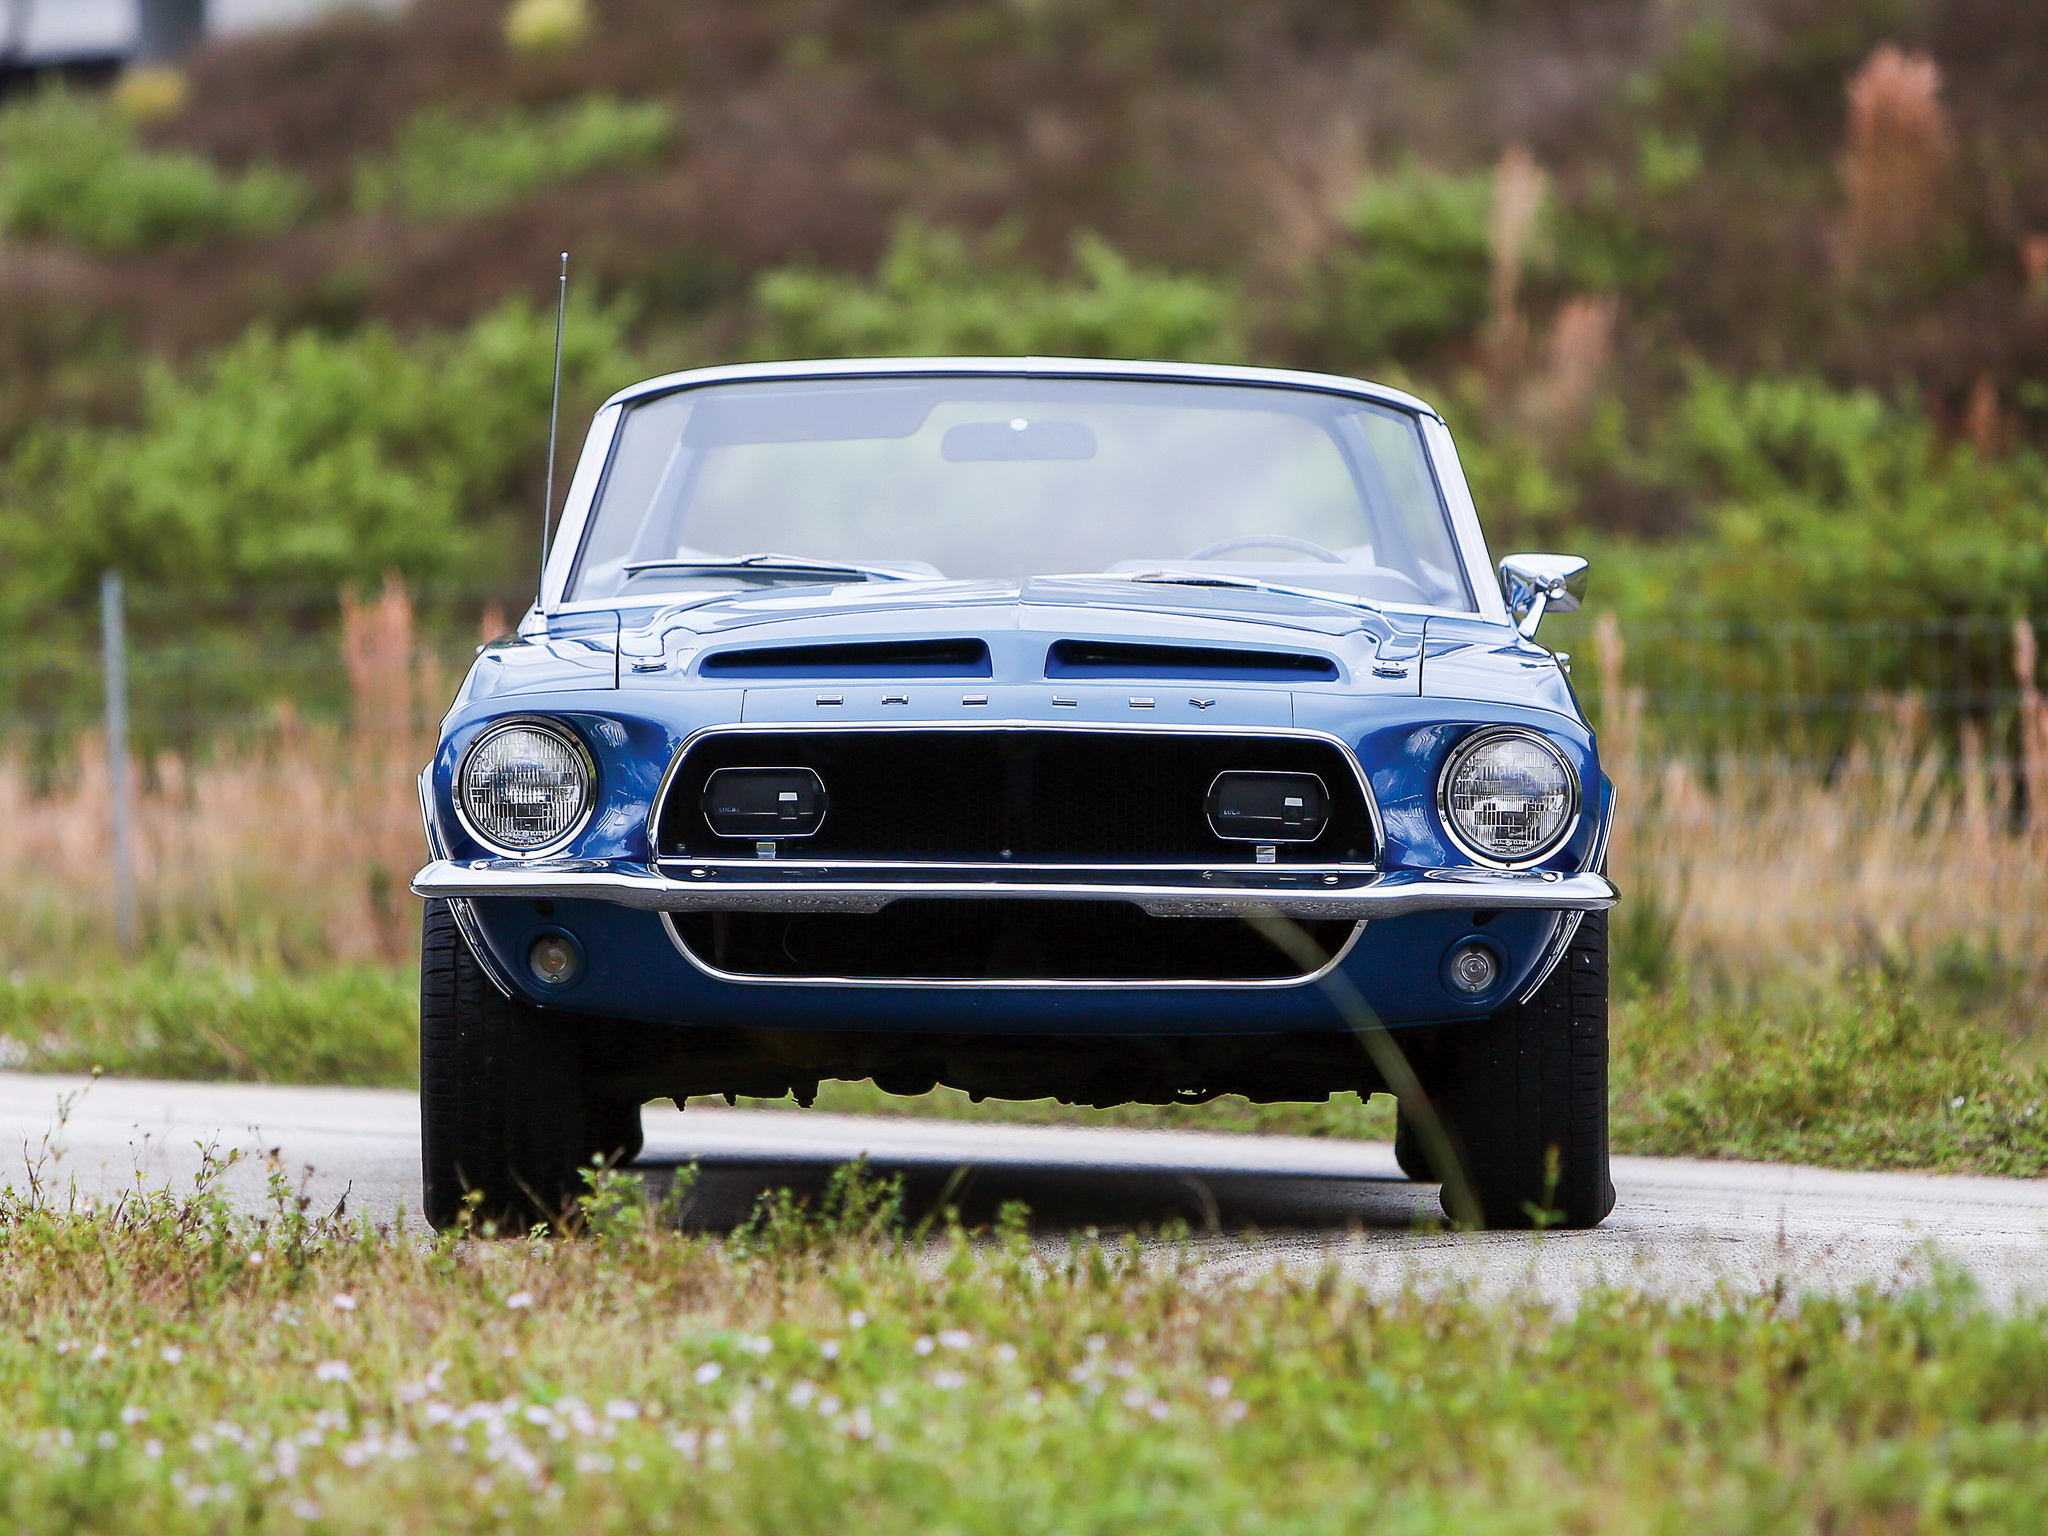 1968, Shelby, Gt350, Convertible, Ford, Mustang, Muscle, Classic, Fs Wallpaper